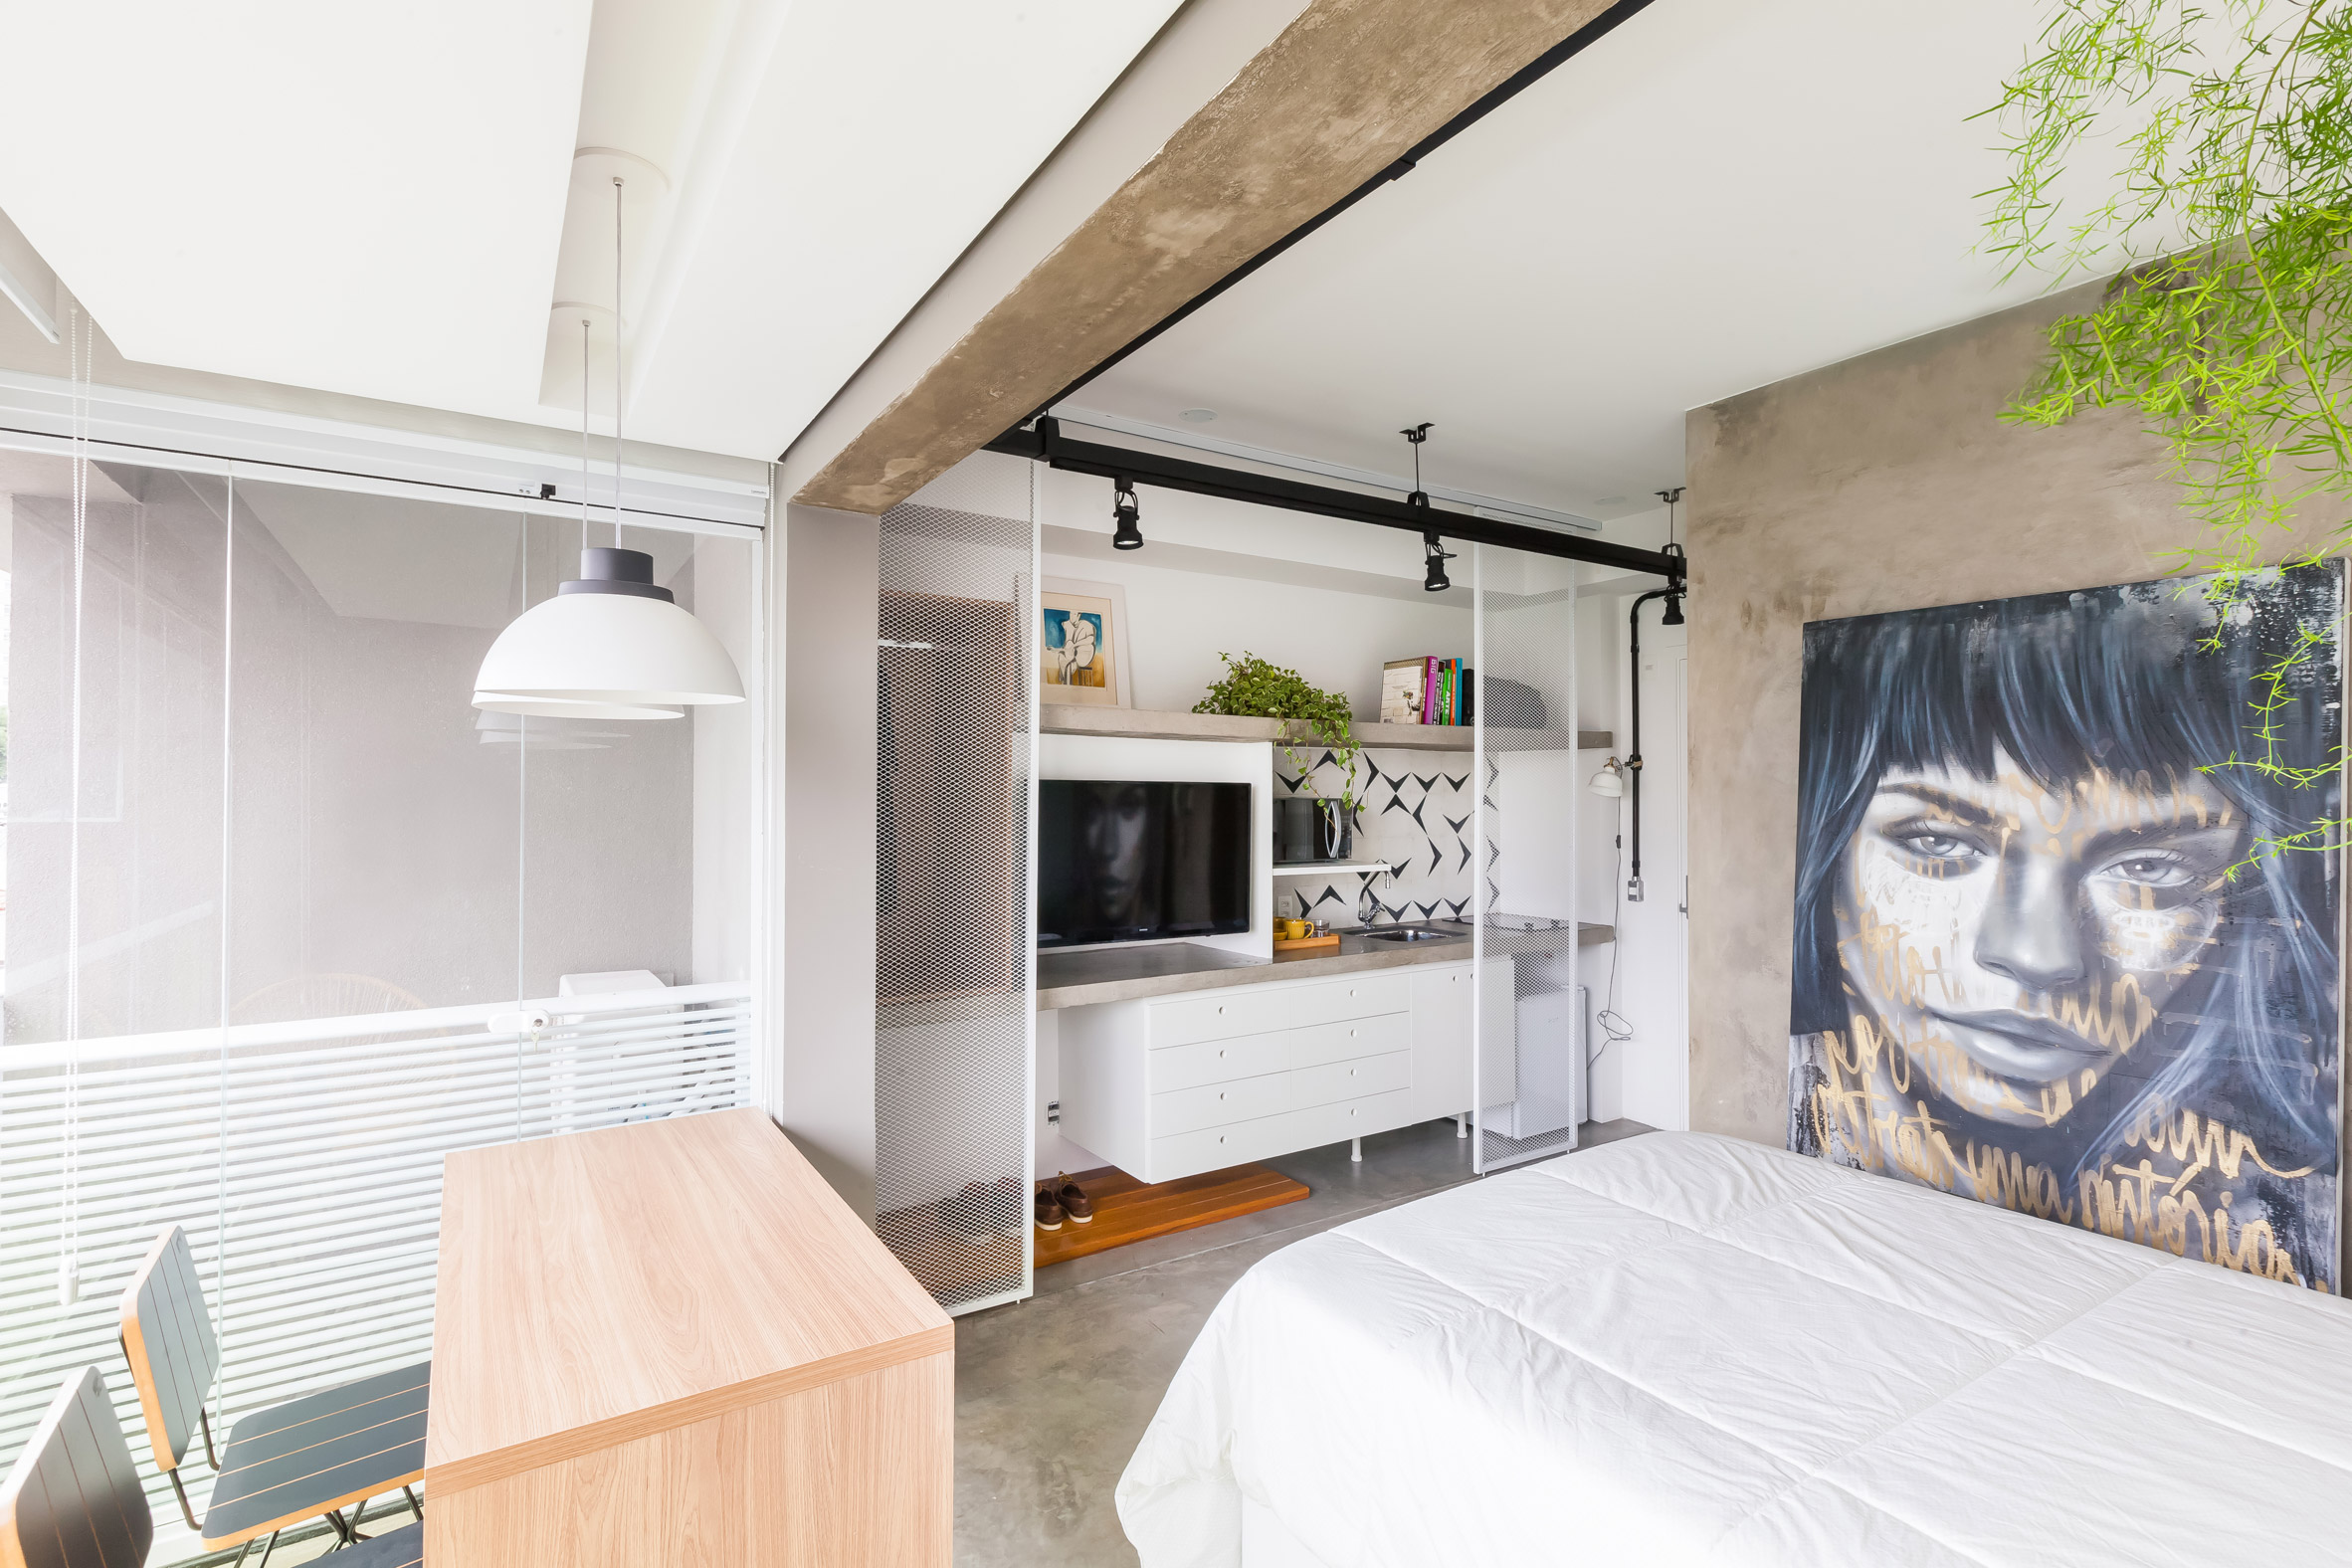 Compact fit by Casa 100 Arquitetura